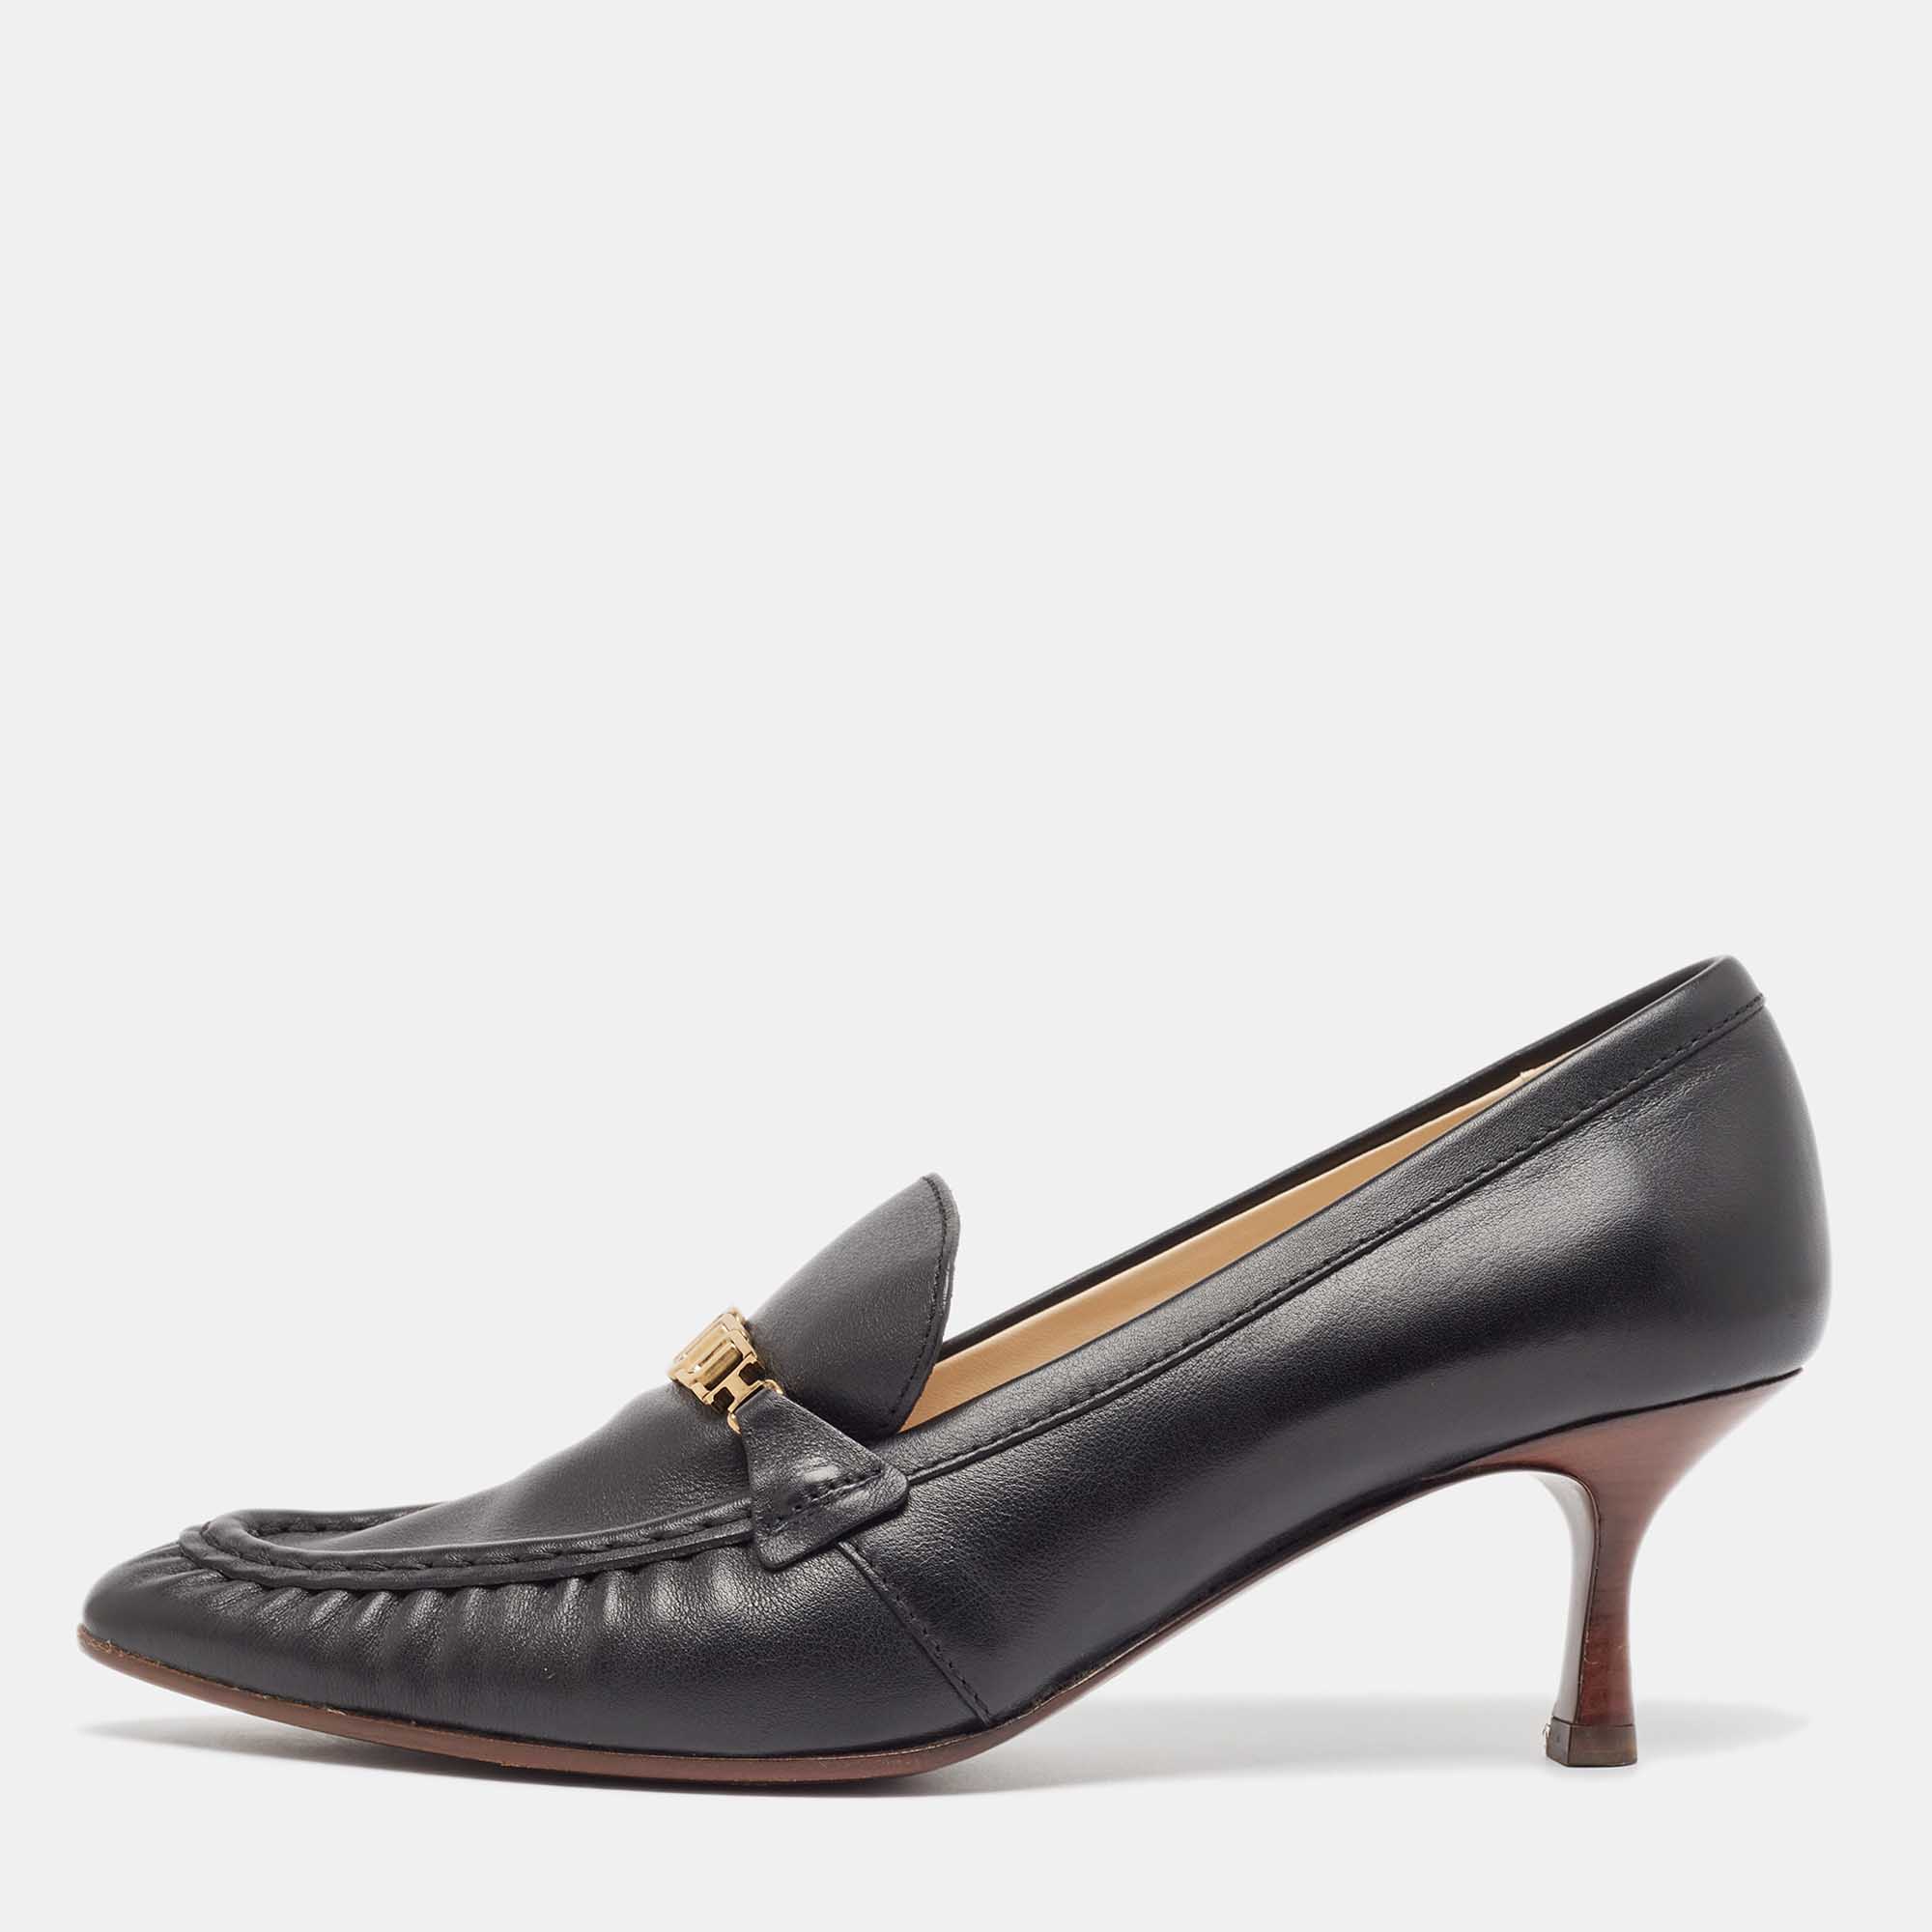 Tod's black leather loafer pumps size 39.5